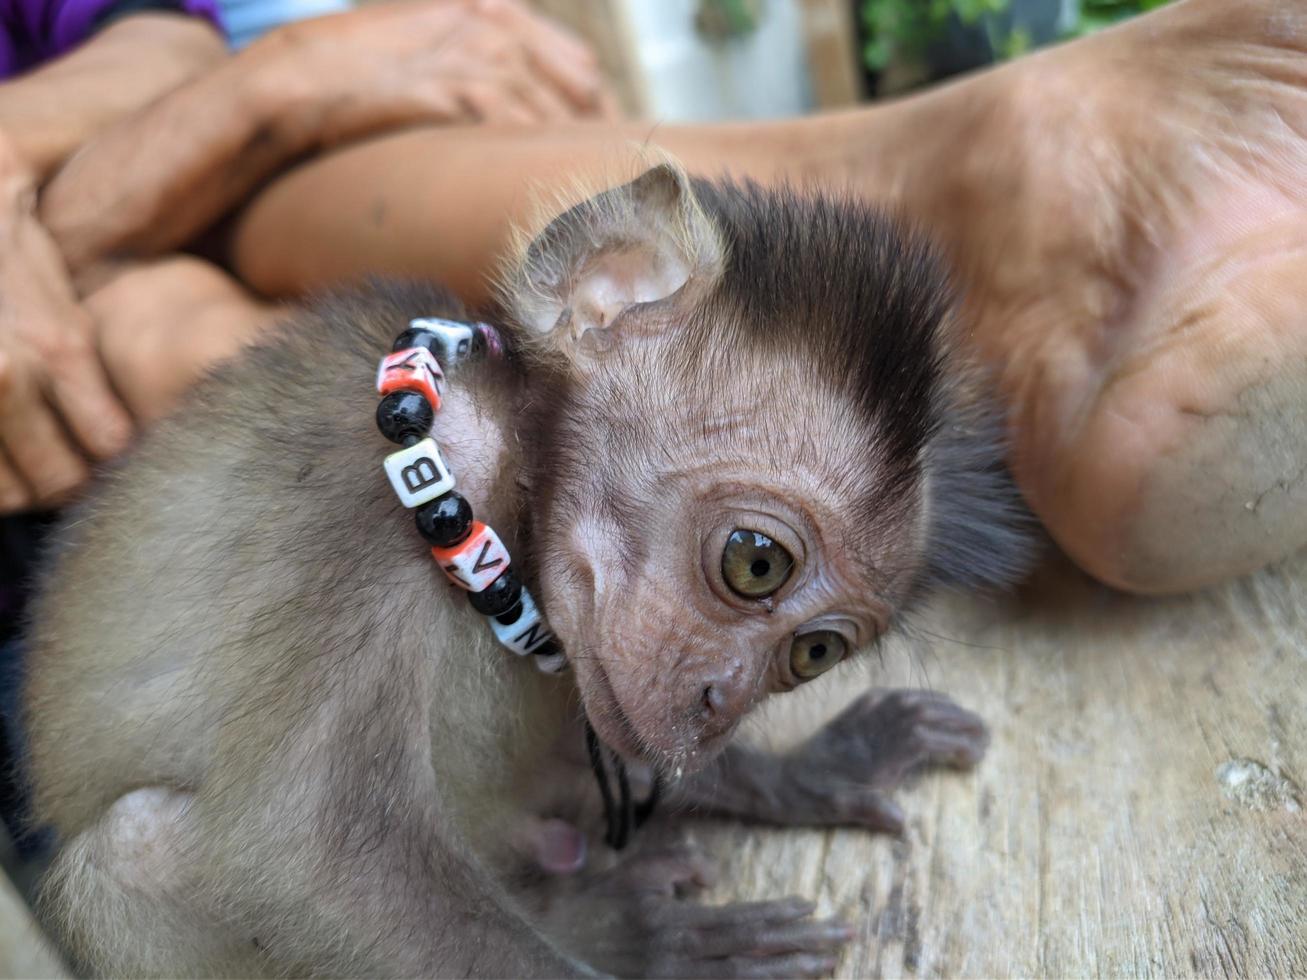 baby monkey separated from its mother and adopted by humans, conservation photo